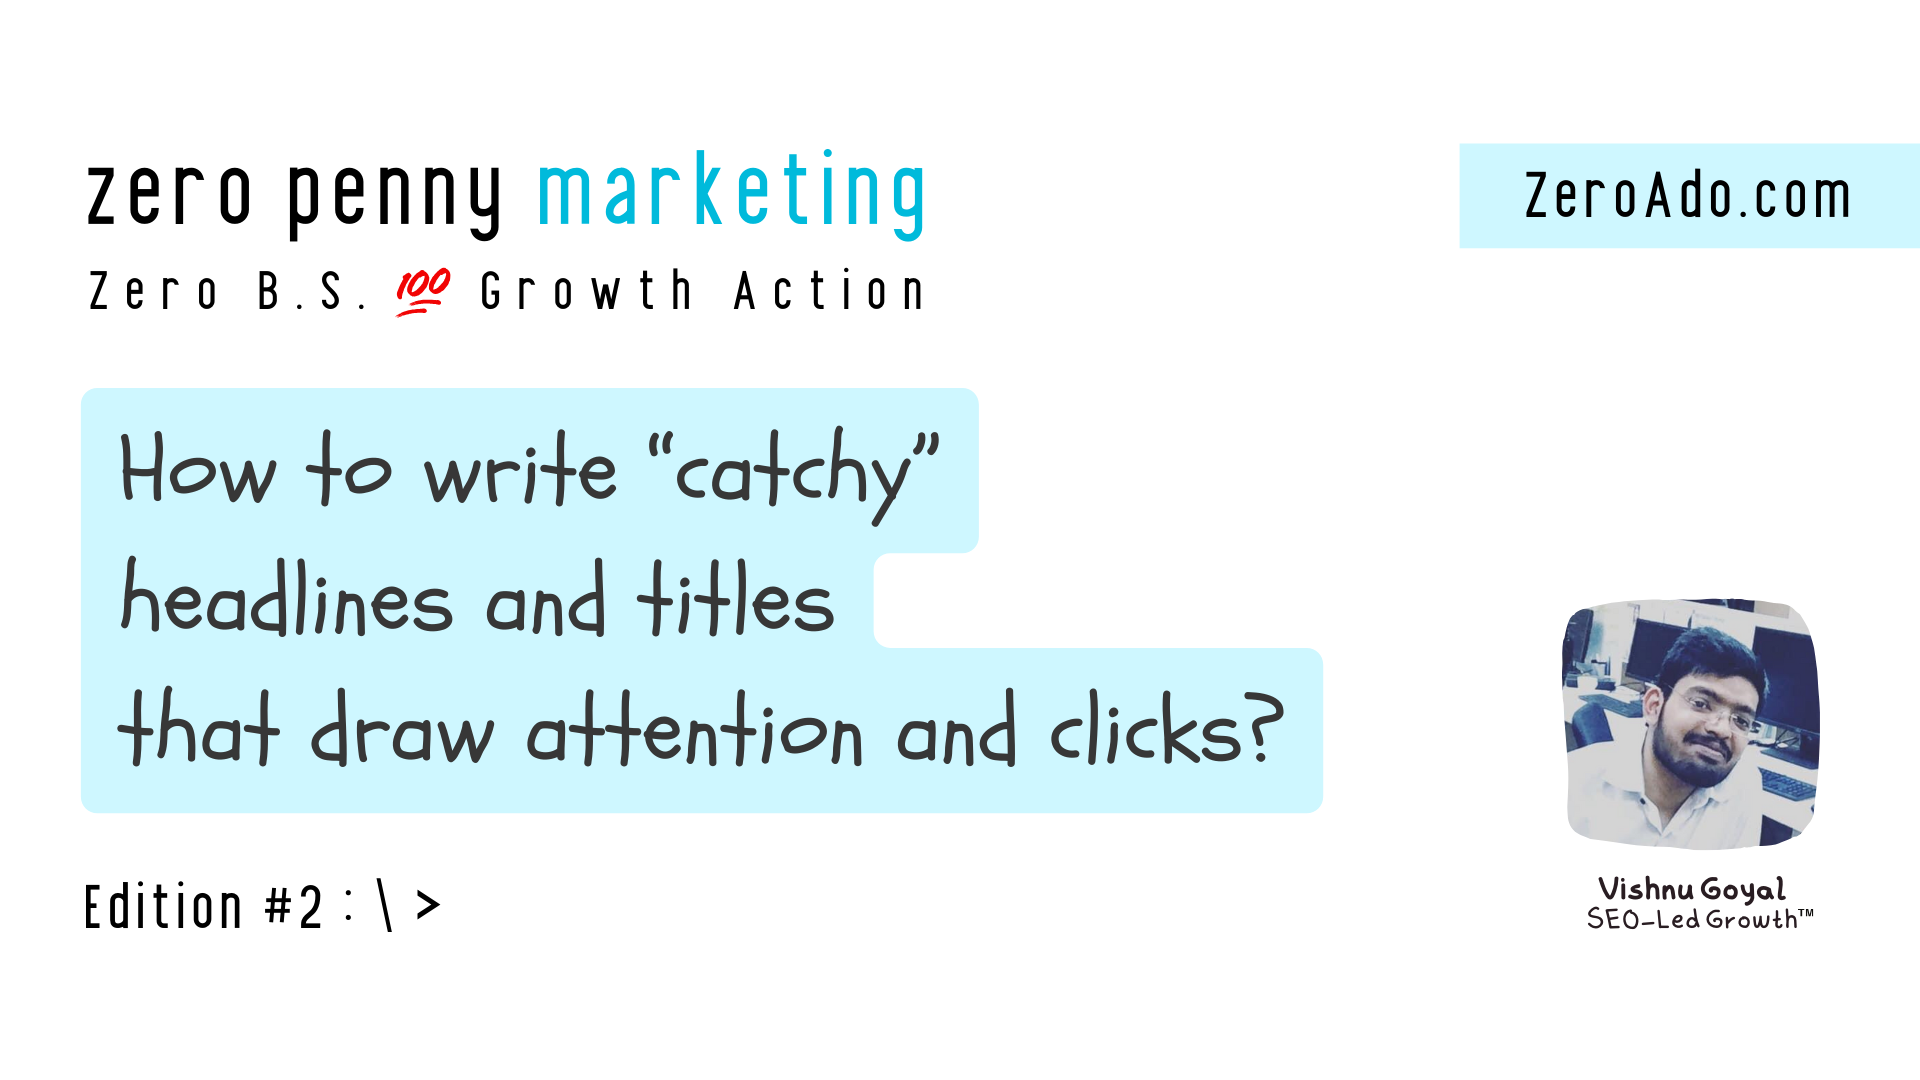 How to write catchy headlines and titles that draw attention and clicks?